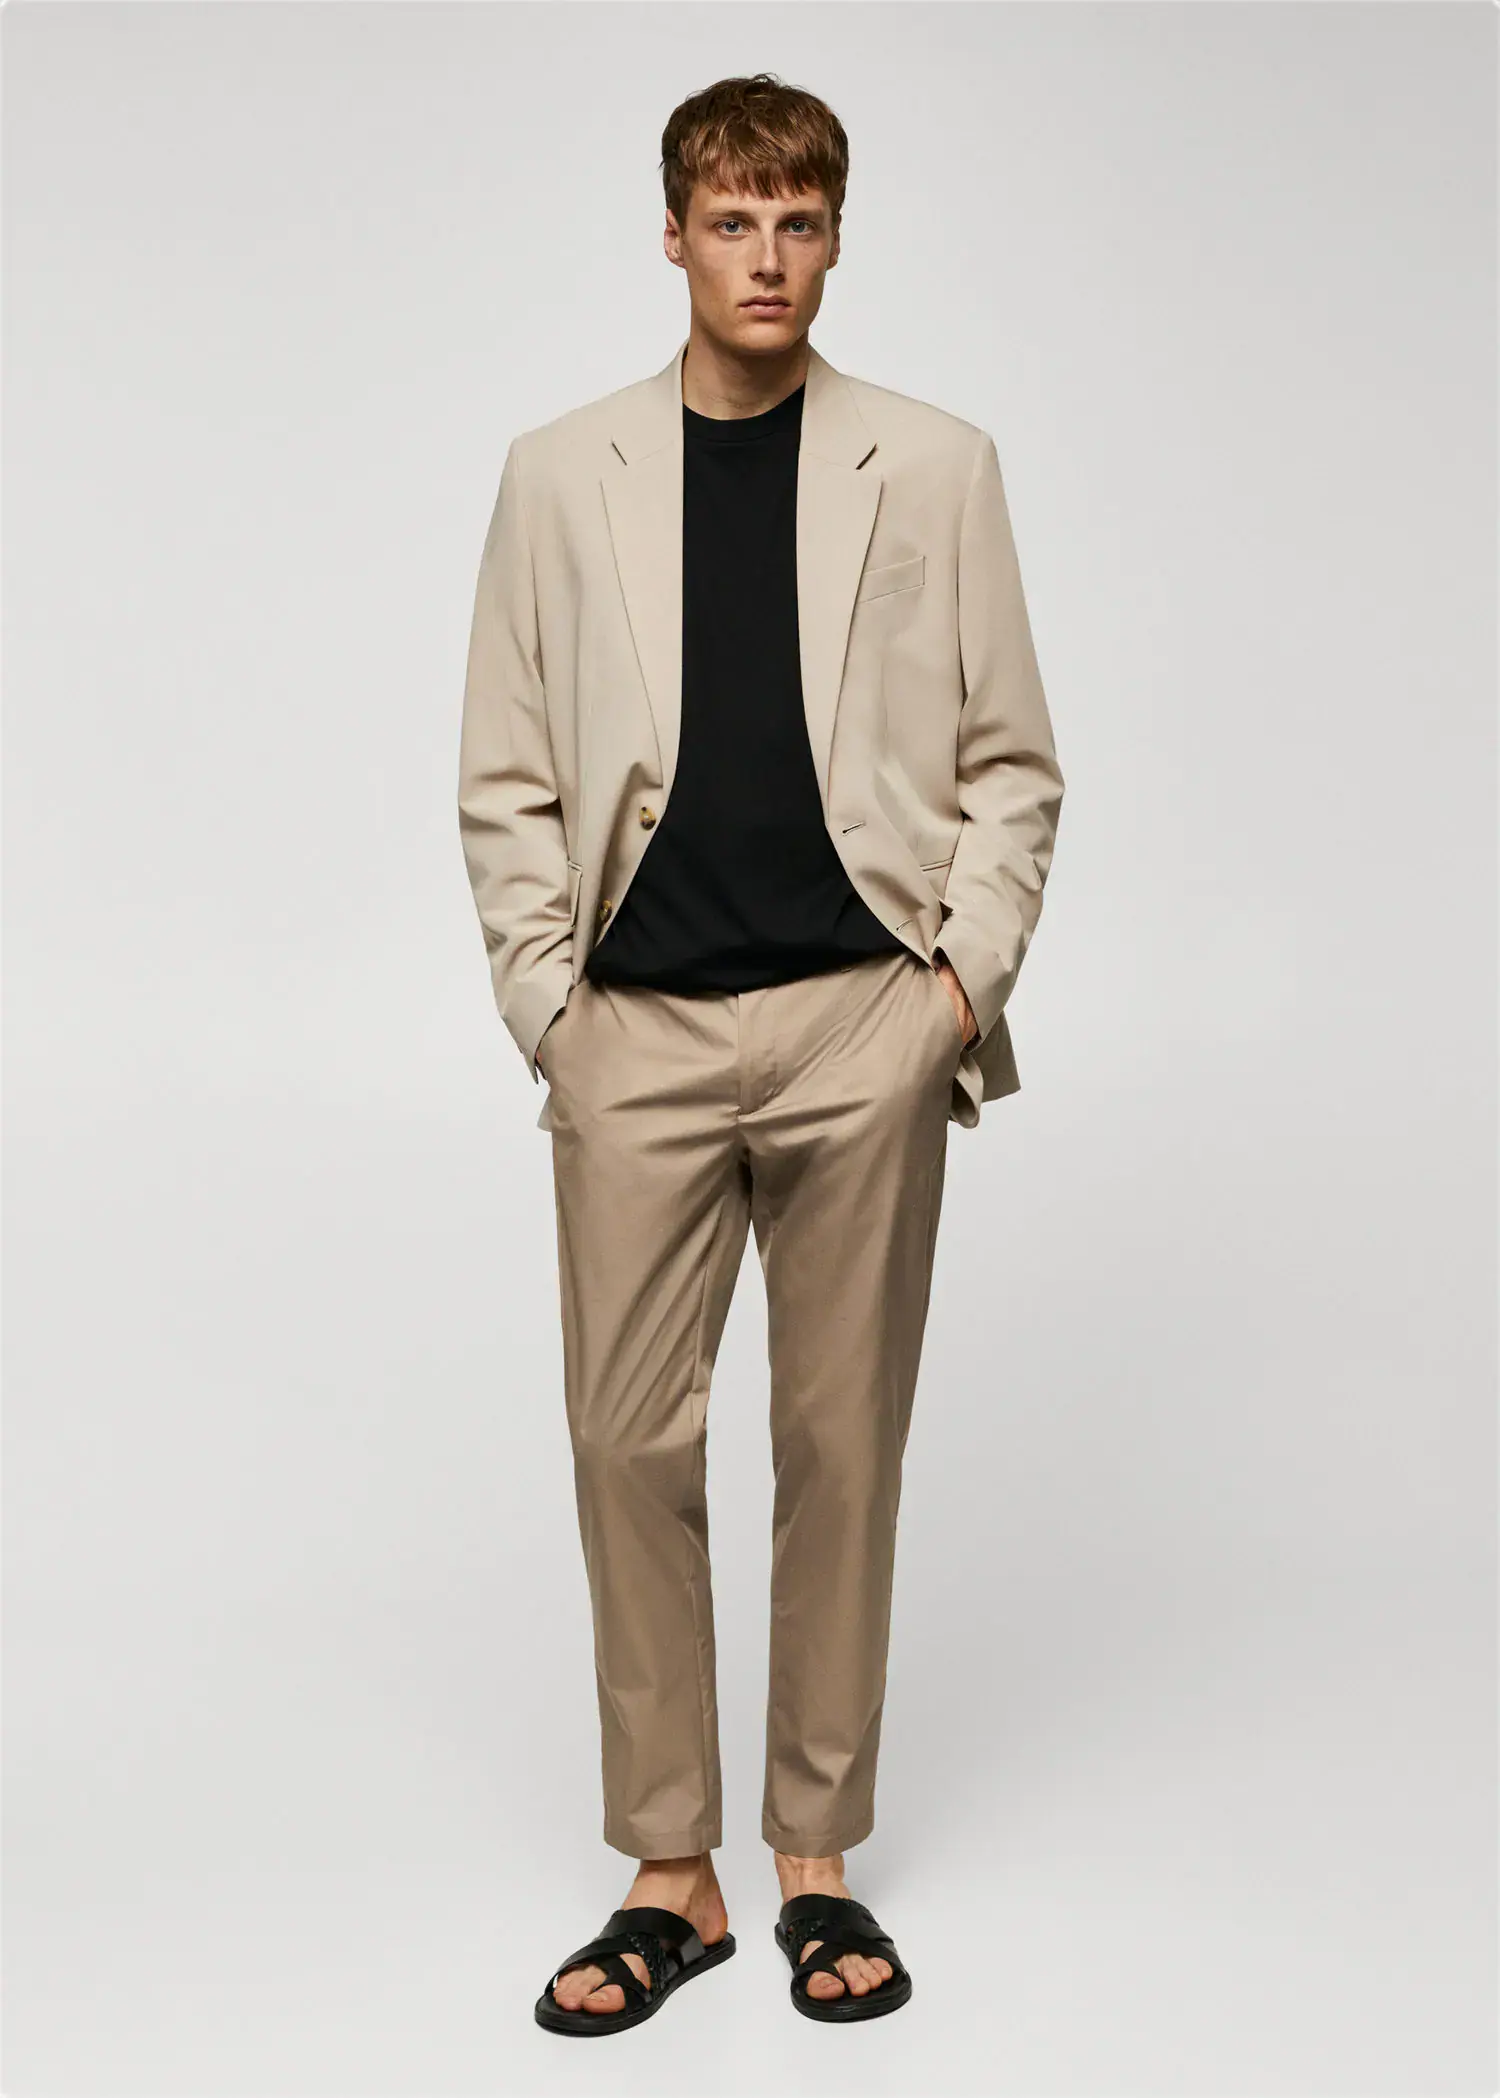 Mango Slim-fit cotton trousers. a man wearing a suit and a black shirt. 